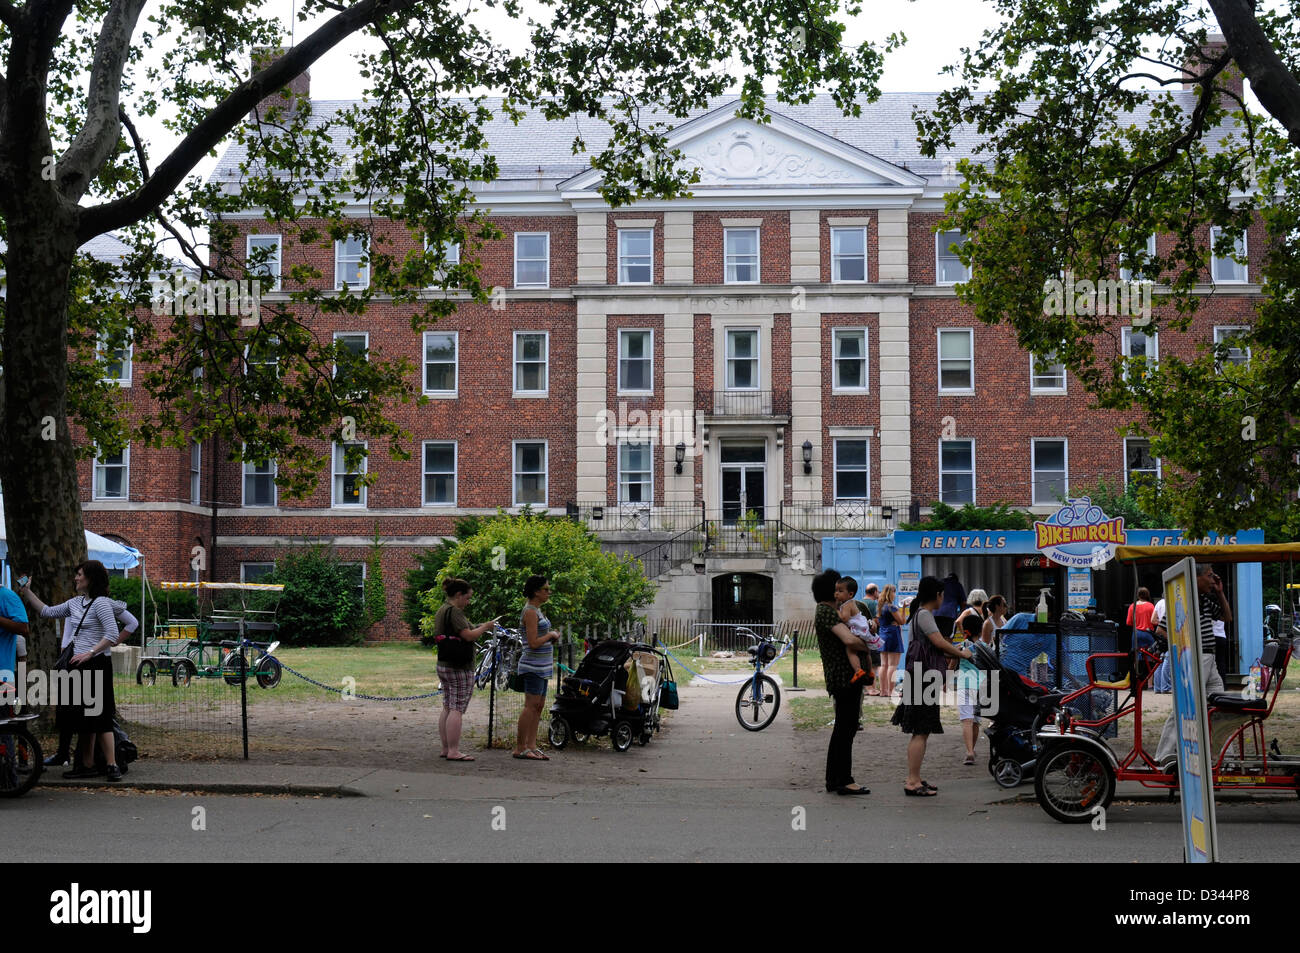 Once home to the Coastguard, Governors Island is now a deserted, idyllic island minutes away from Manhattan, New York City. 2012 Stock Photo